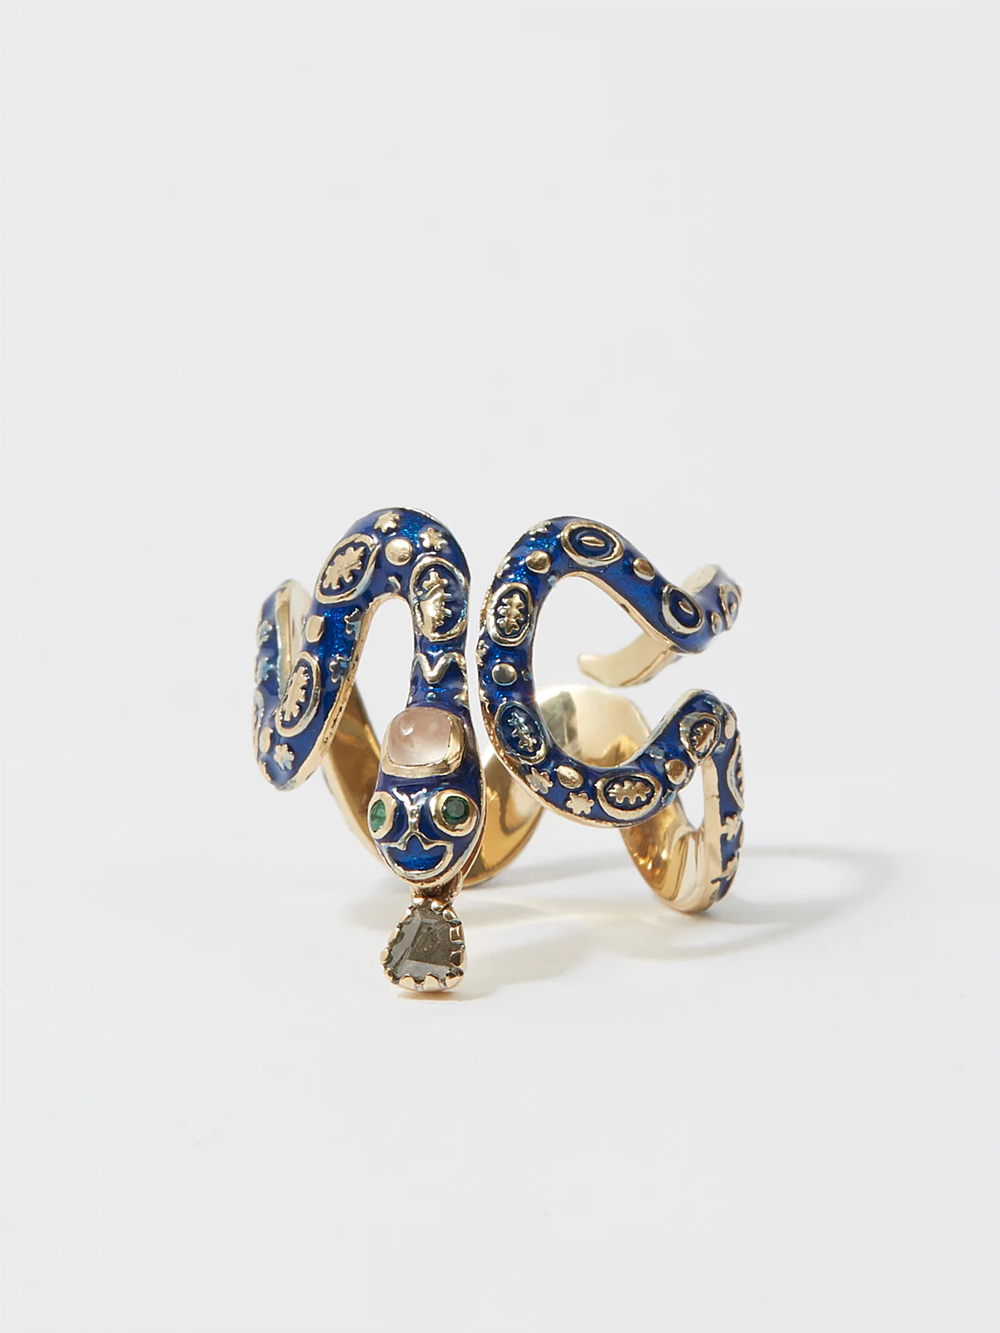 EVE SERPENT BLUE JEAN AND GOLD ENAMEL RING